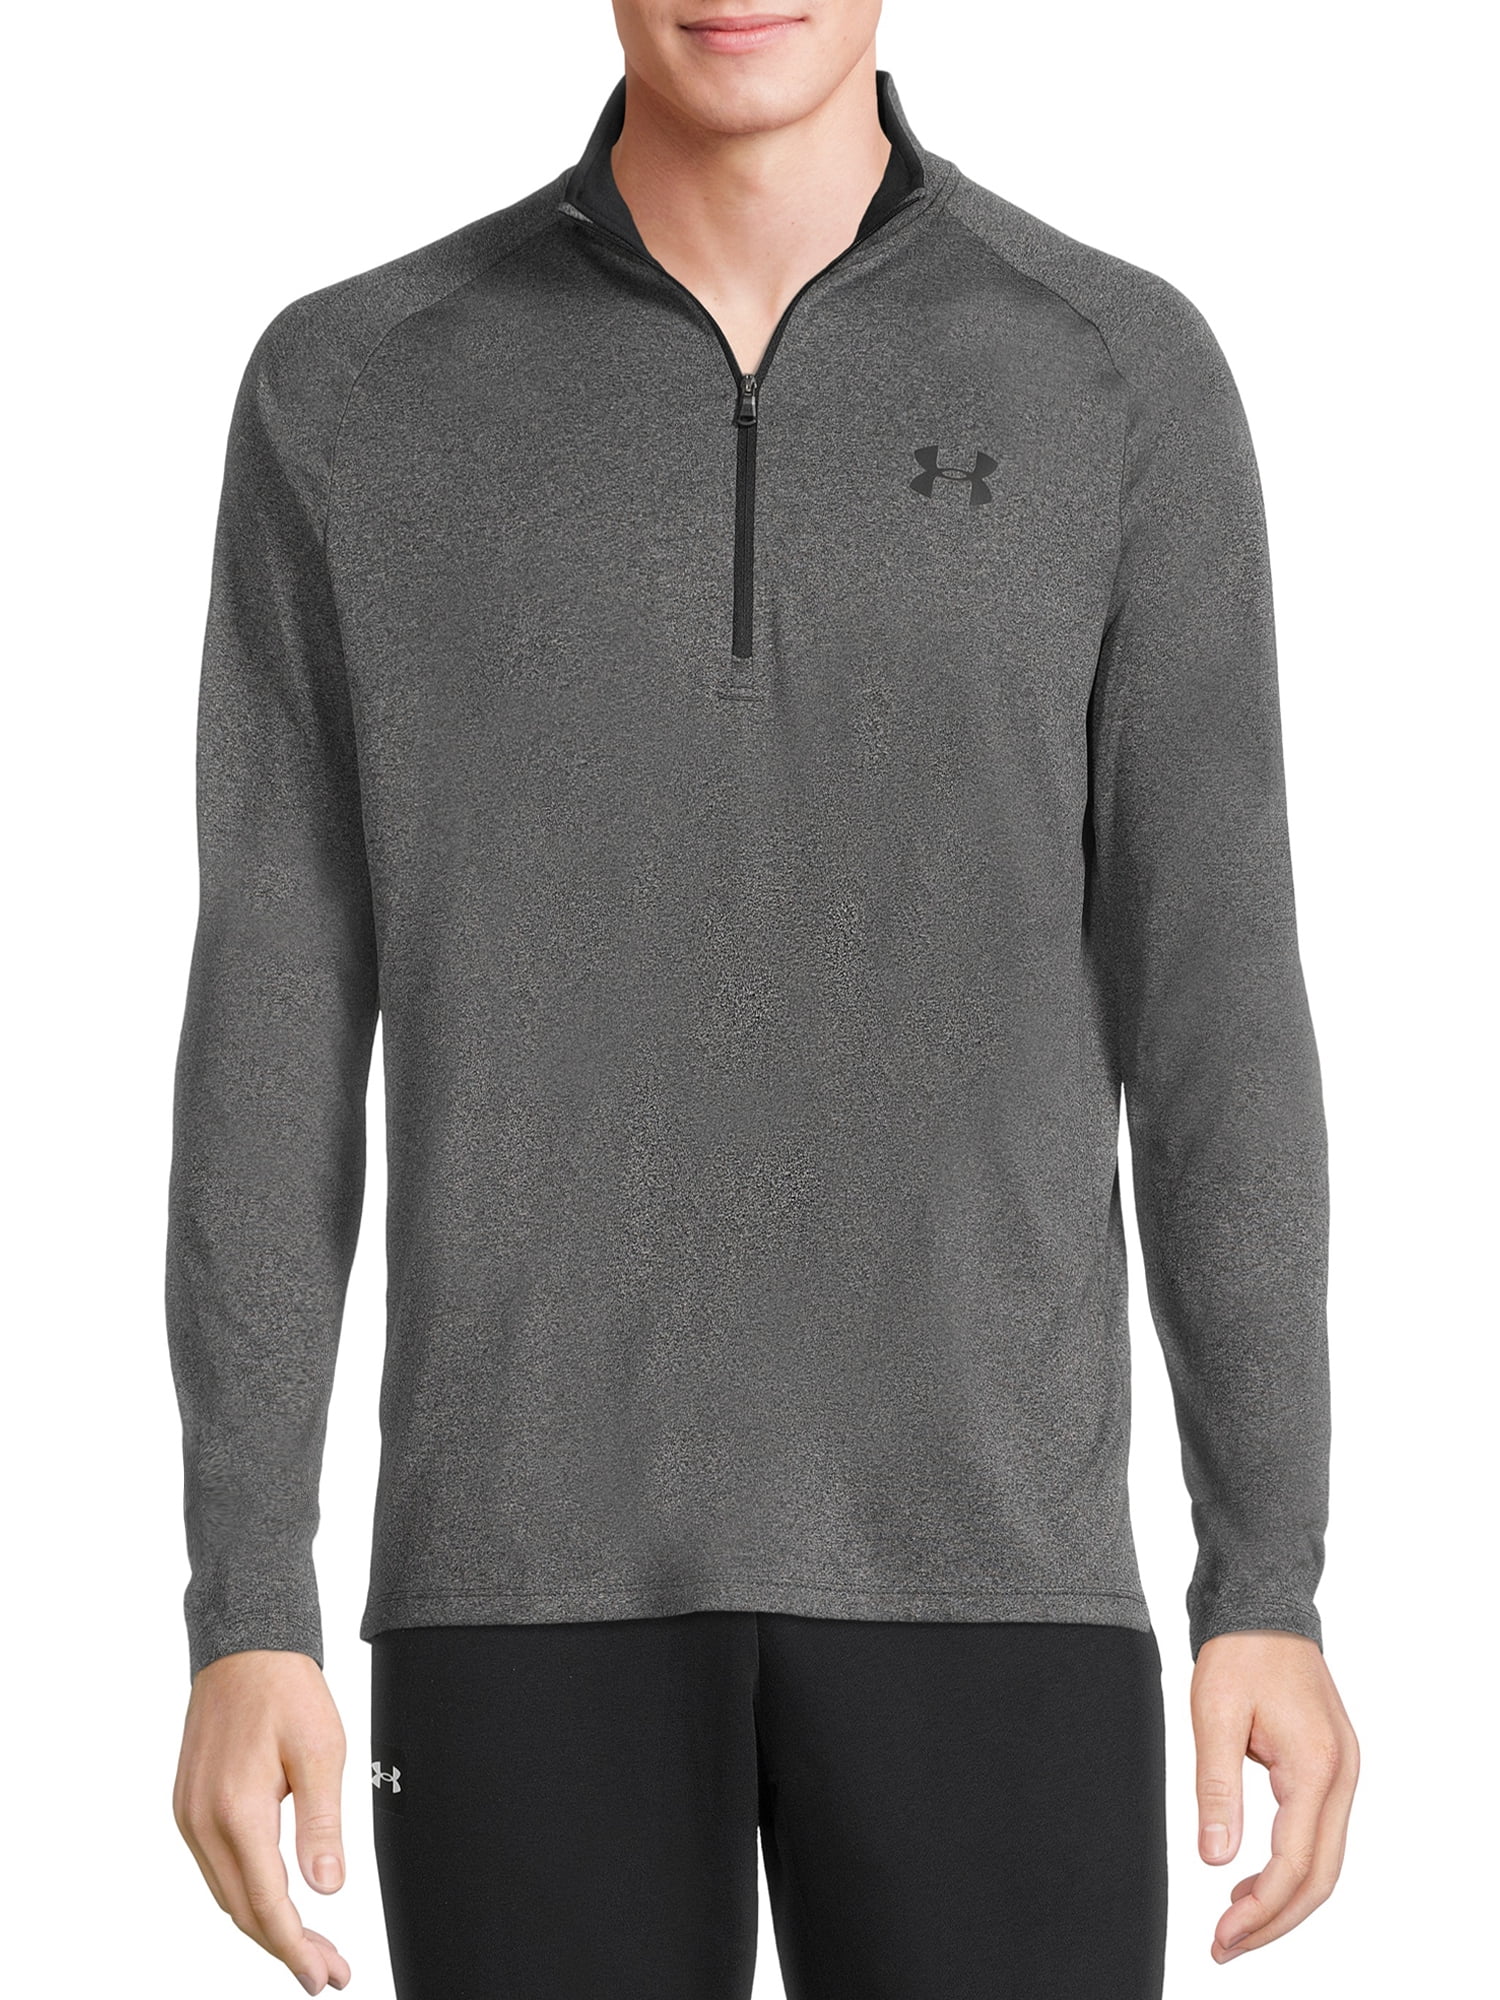 máximo Cardenal Alexander Graham Bell Under Armour Men's and Big Men's UA Tech Half Zip Pullover with Long  Sleeves, Sizes up to 2XL - Walmart.com